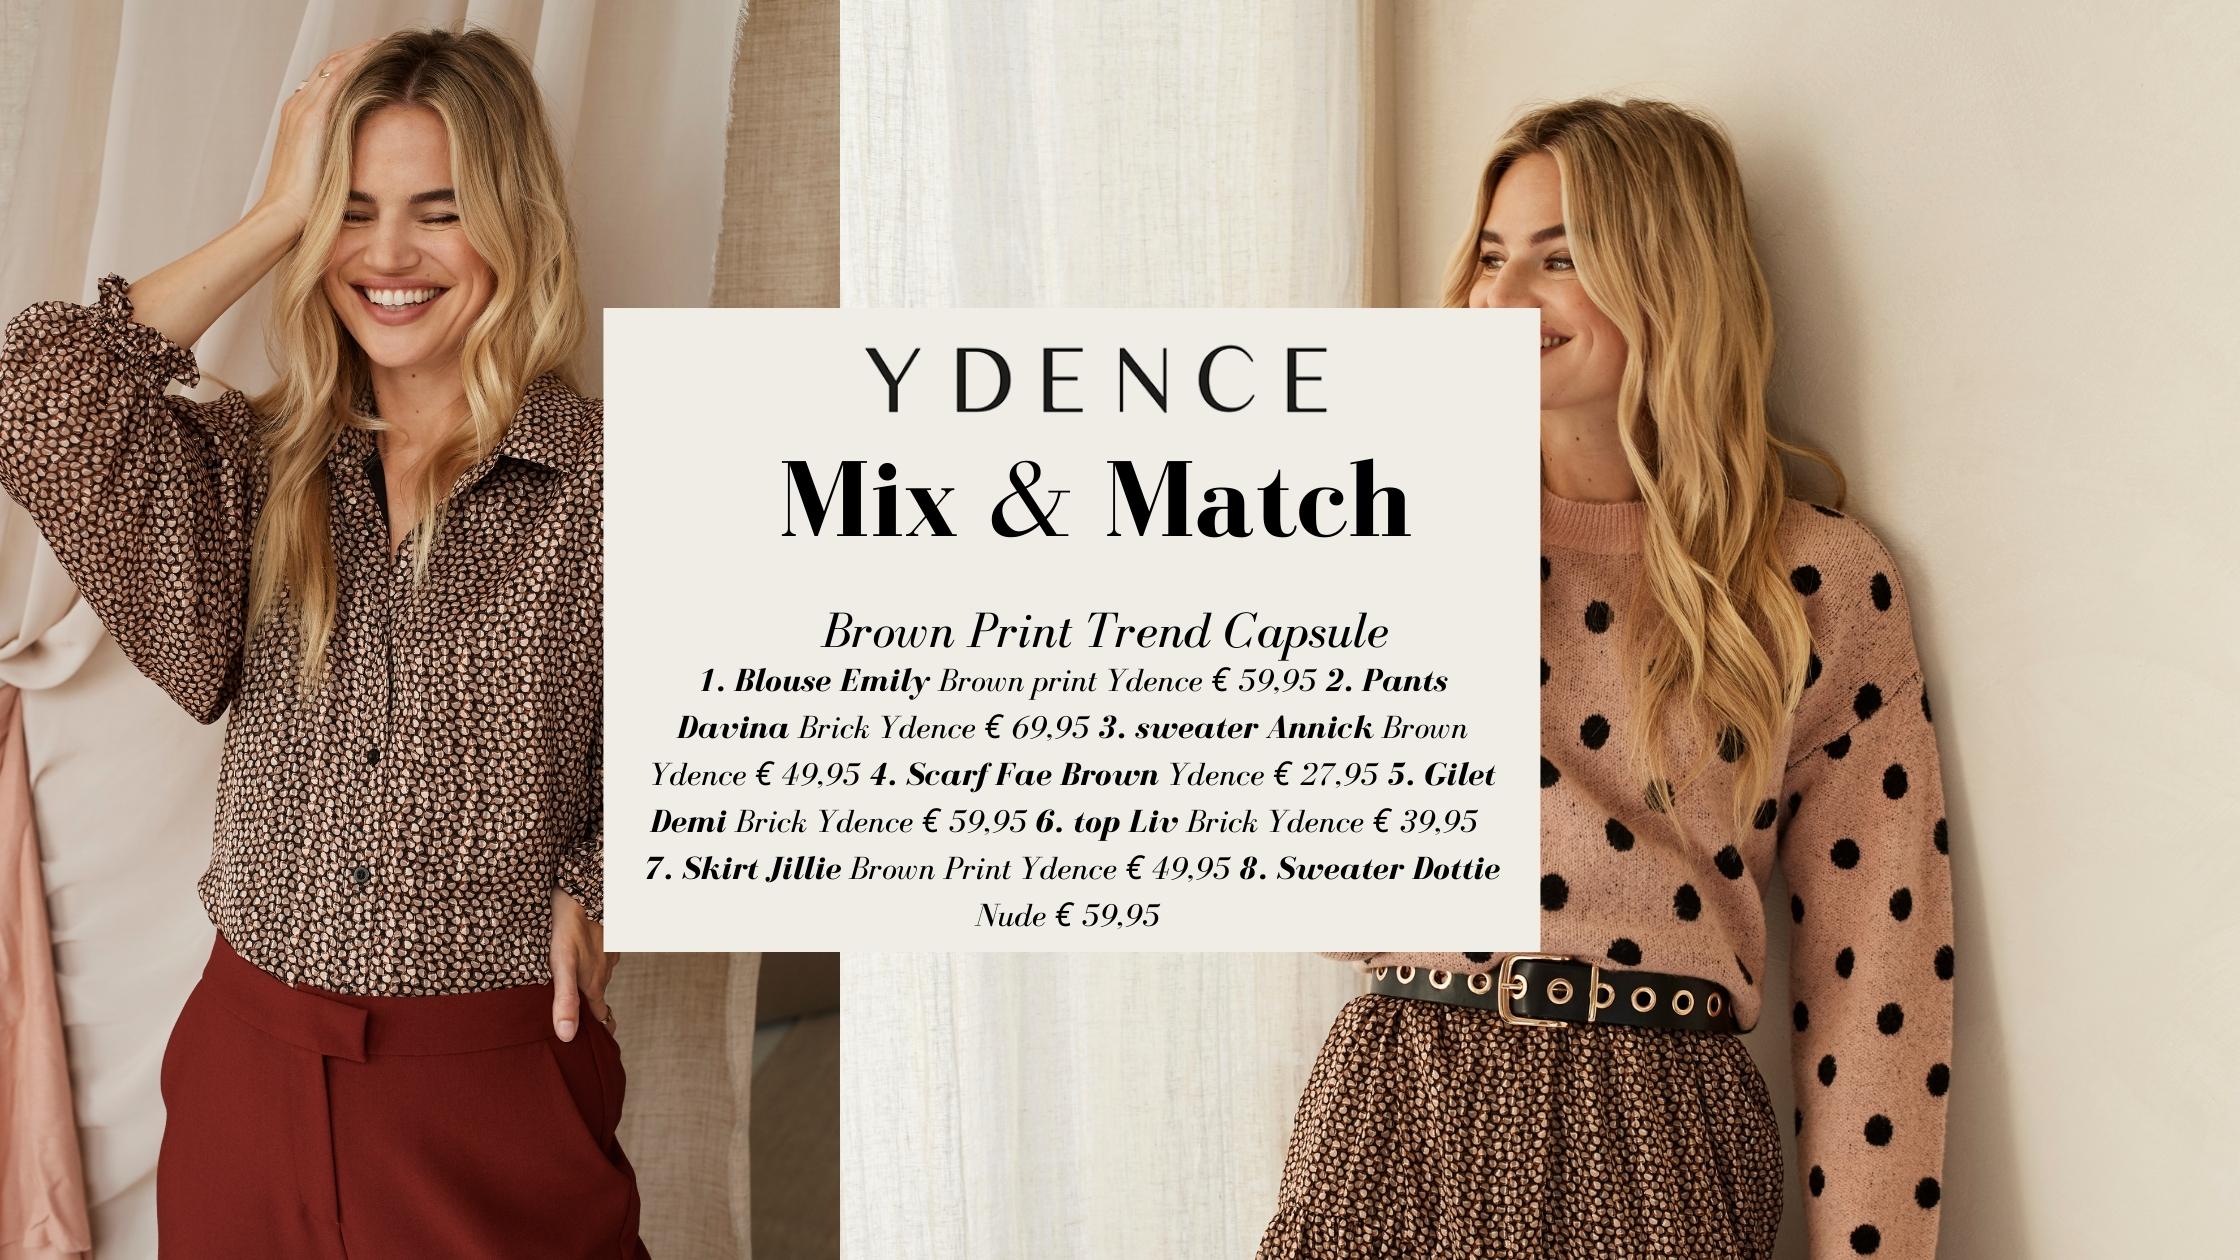 Mix & Match | Ydence High Winter Brown Print | Trend Capsule Wardrobe